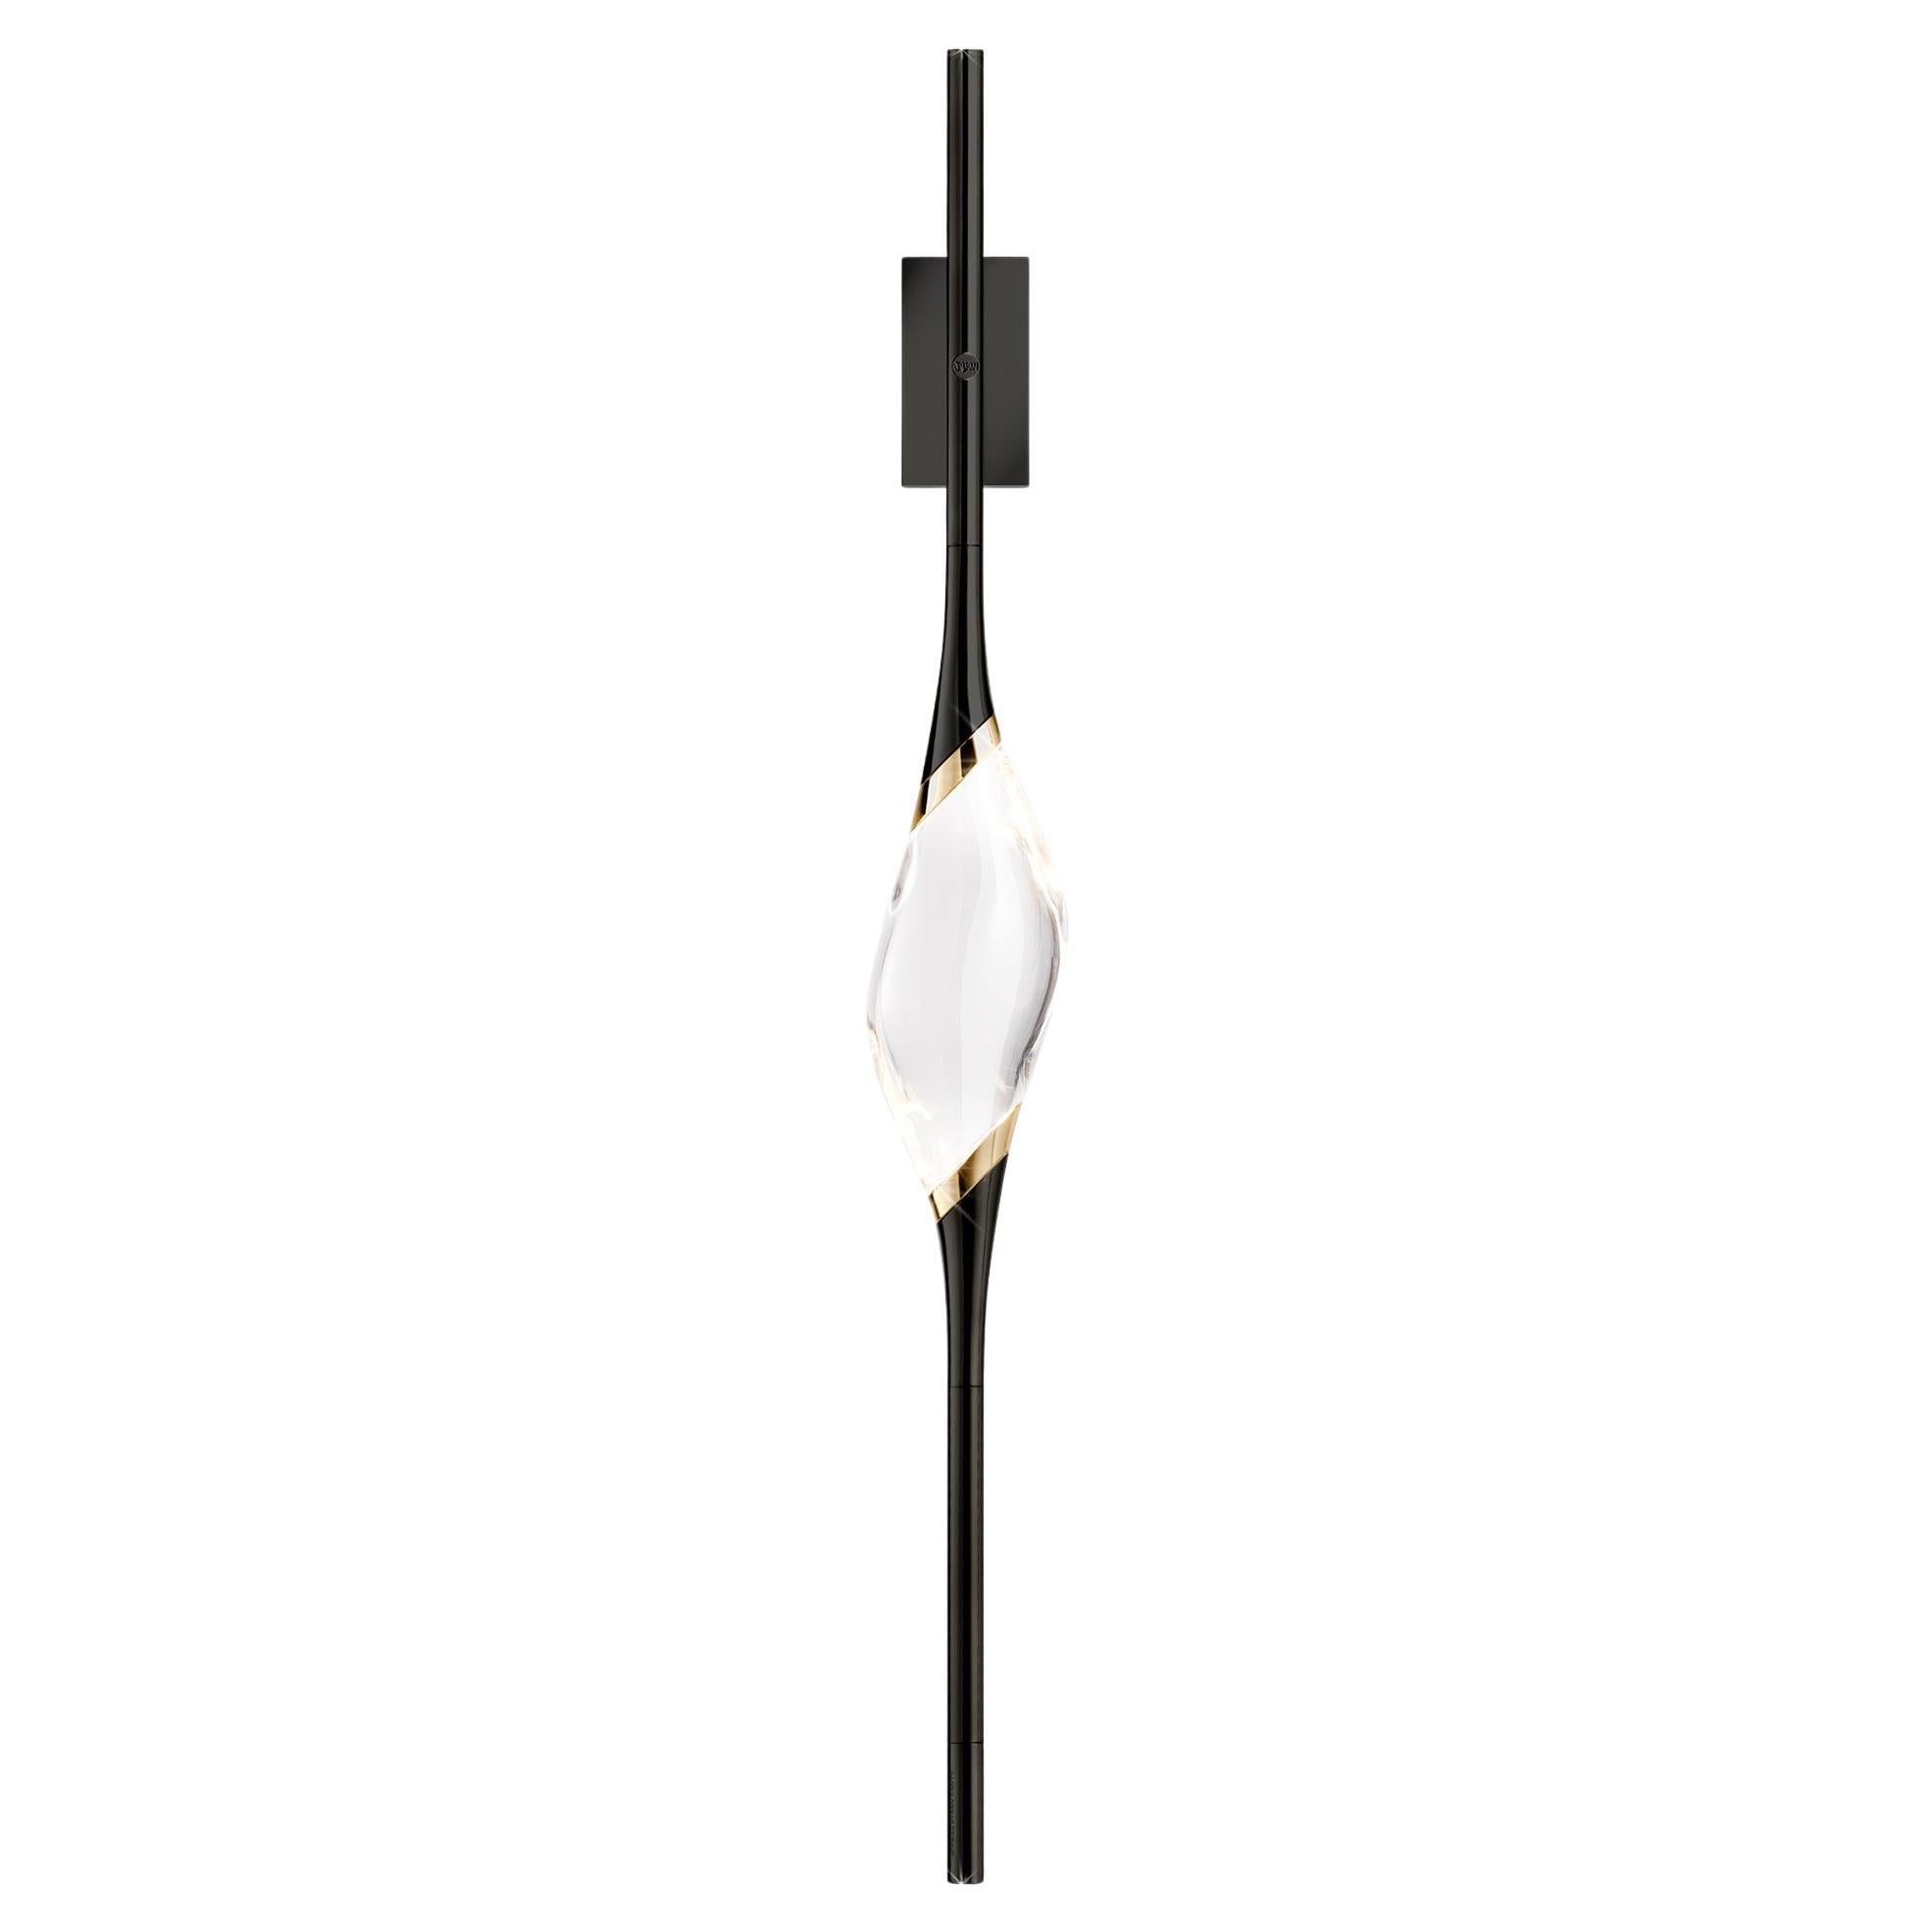 "Il Pezzo 12 Wall Sconce" - black and polished brass - crystal - Made in Italy